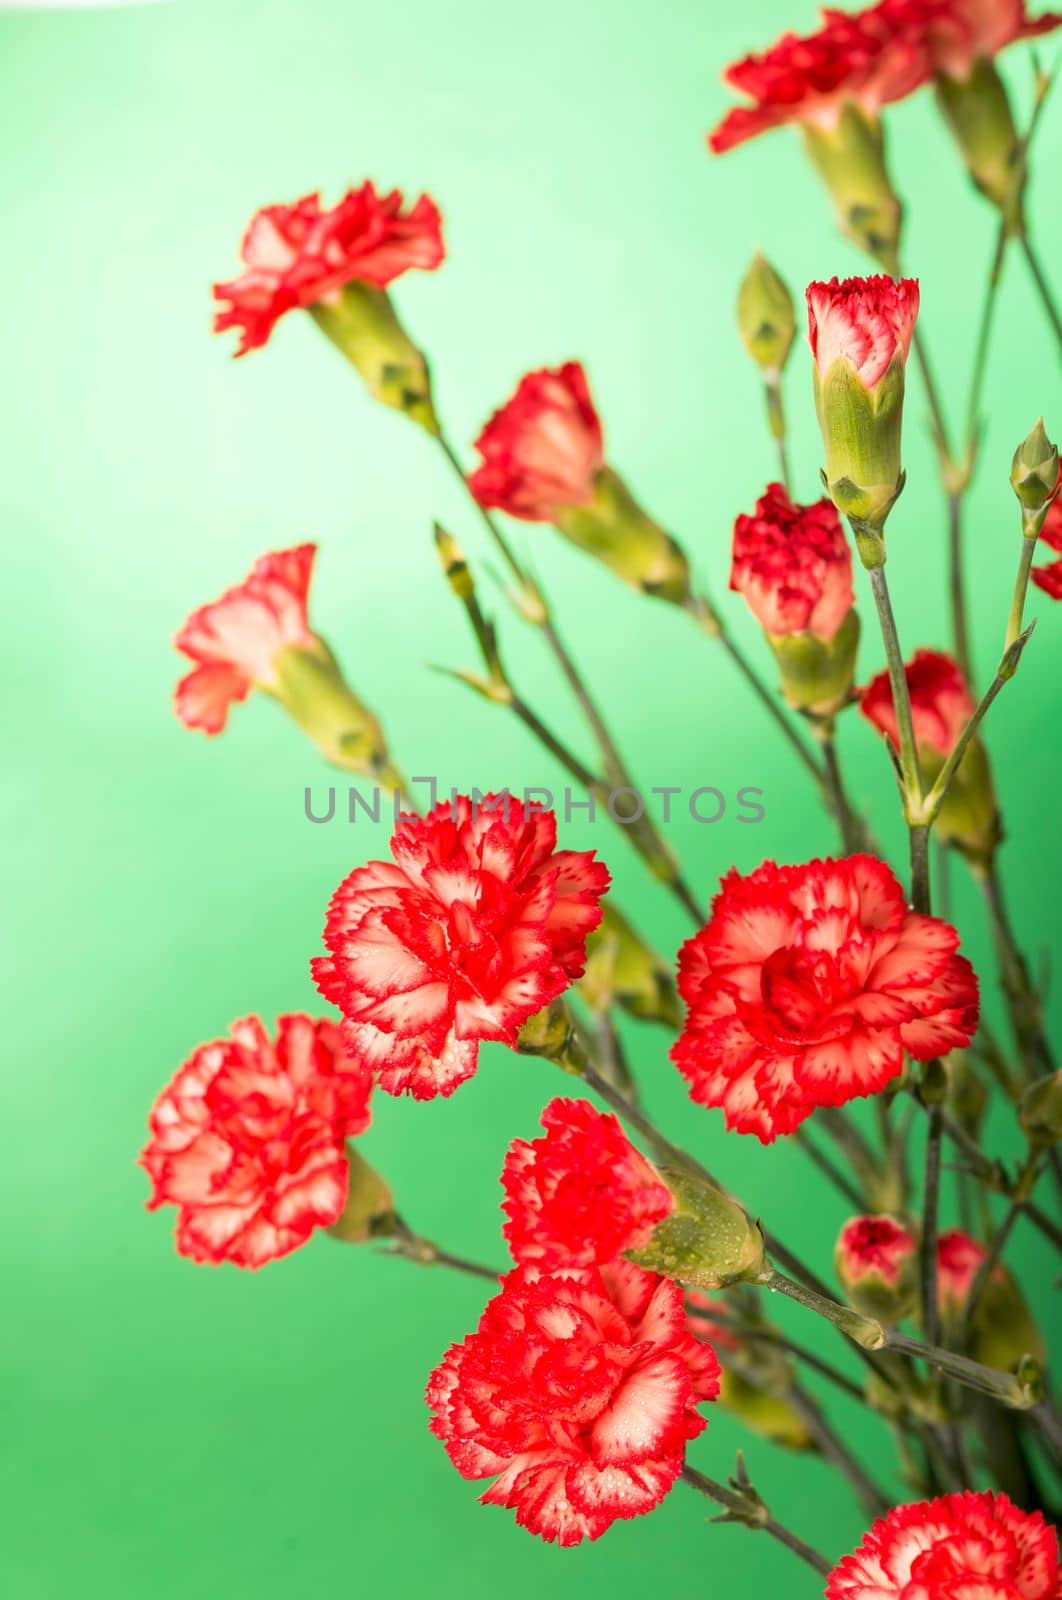 Blank card with carnation flowers. Red carnation flowers isolated on green background by aprilphoto